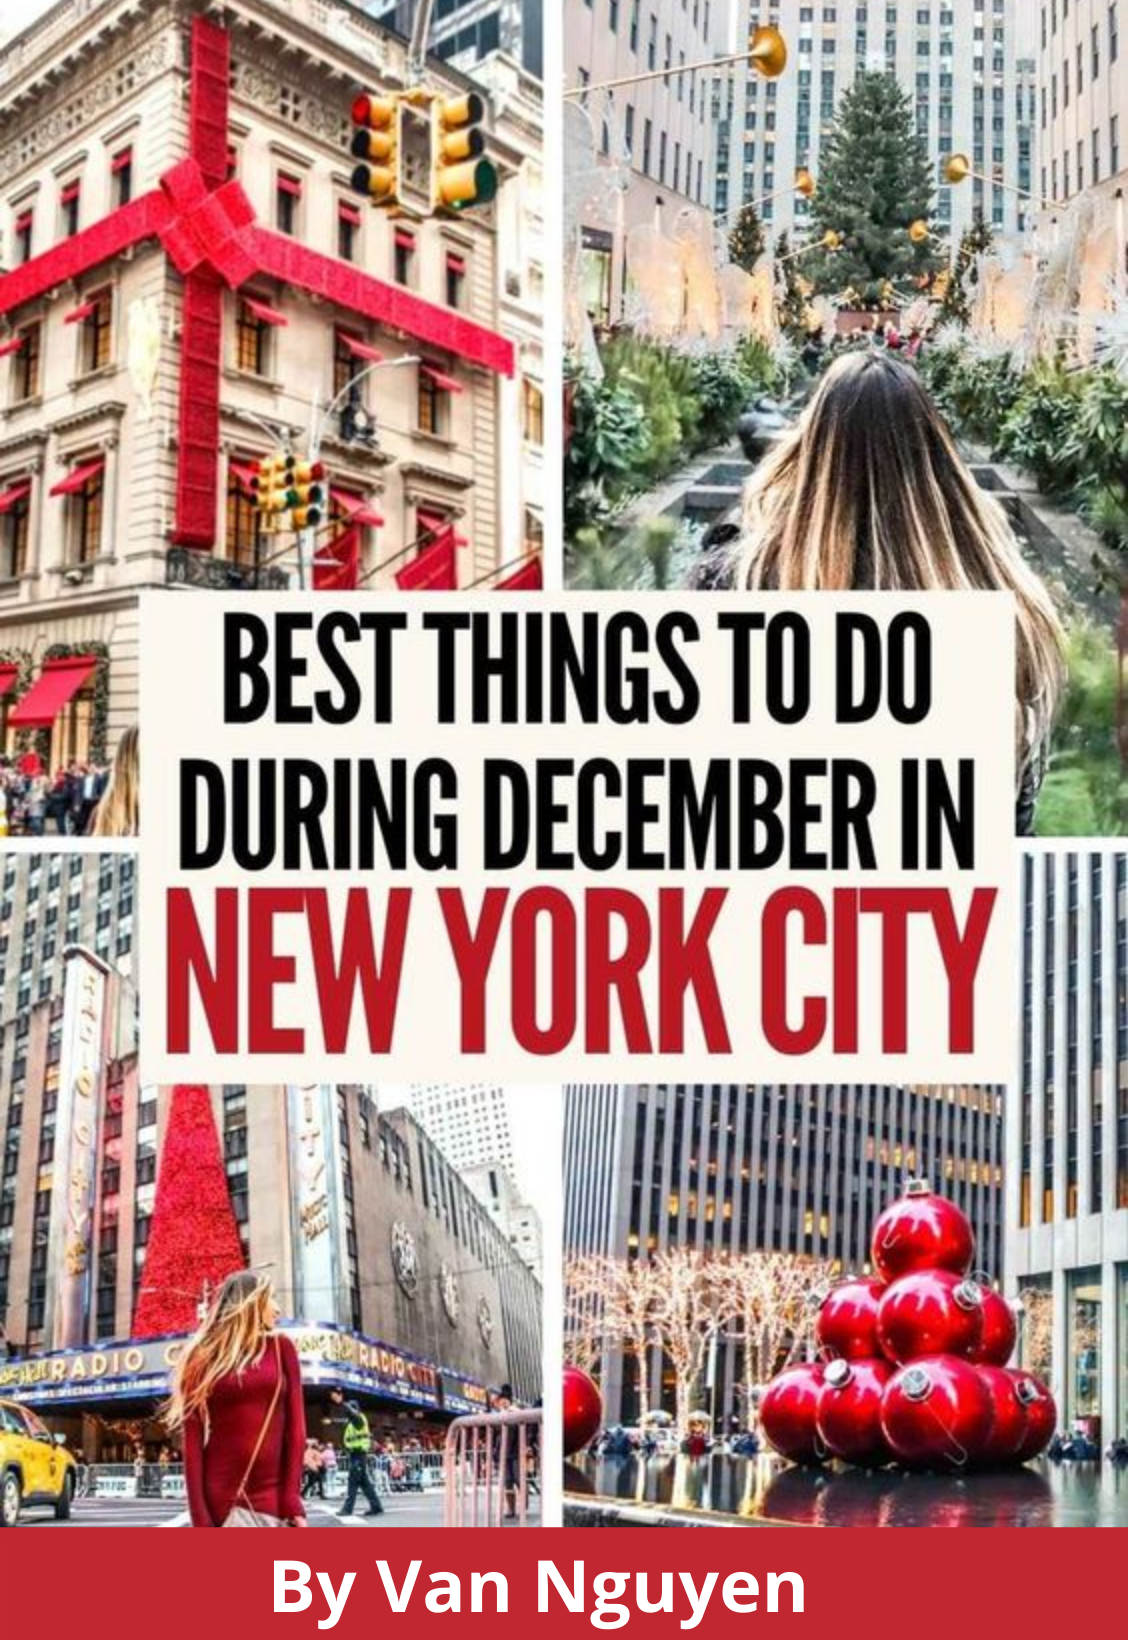 NYC december 2021 guide